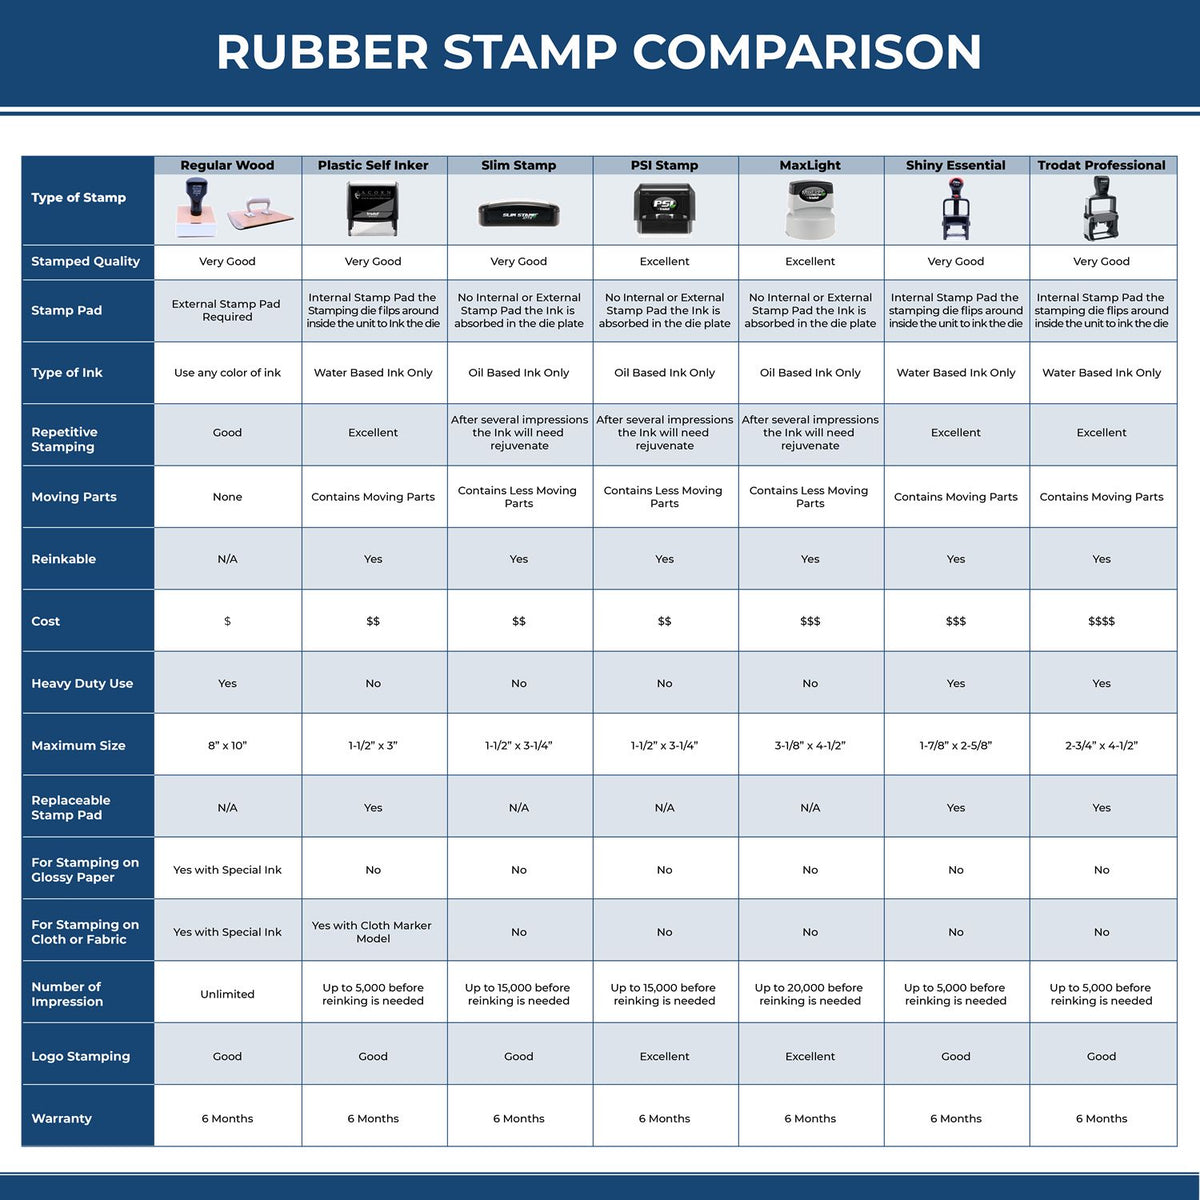 Large Self-Inking Shadow Copy Stamp 4876S Rubber Stamp Comparison